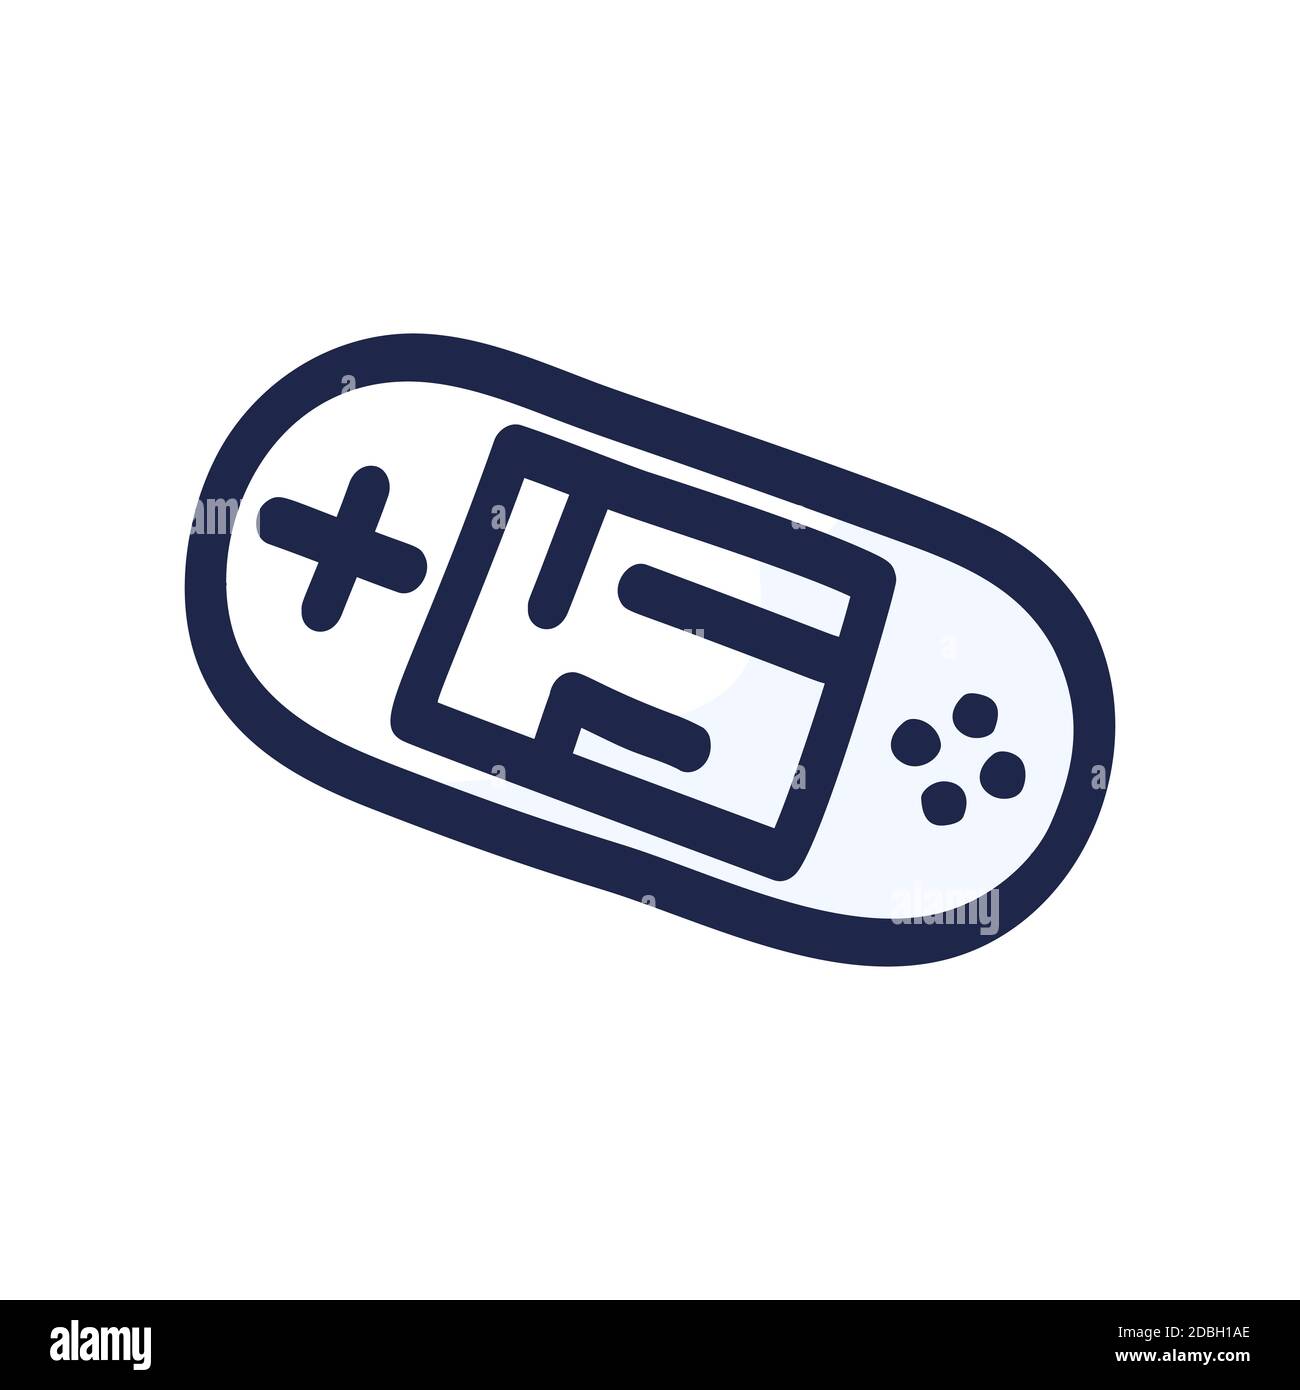 Joystick for video game. Controller buttons hand-drawn in doodle-style vector icon. Vector illustration Stock Photo